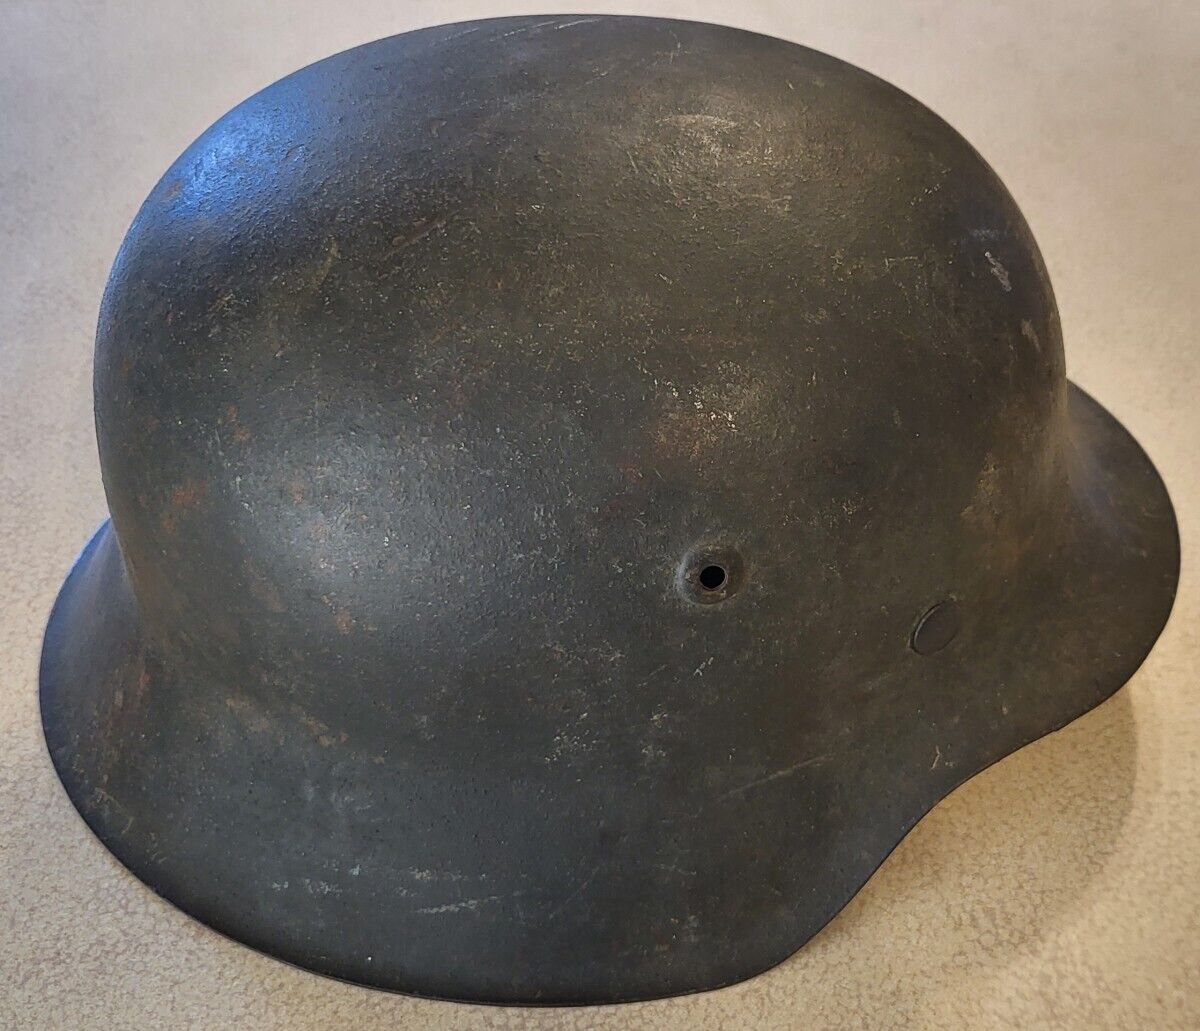 WWII German No Decal M42 Helmet w/ Liner. Large Size 68 hkp68